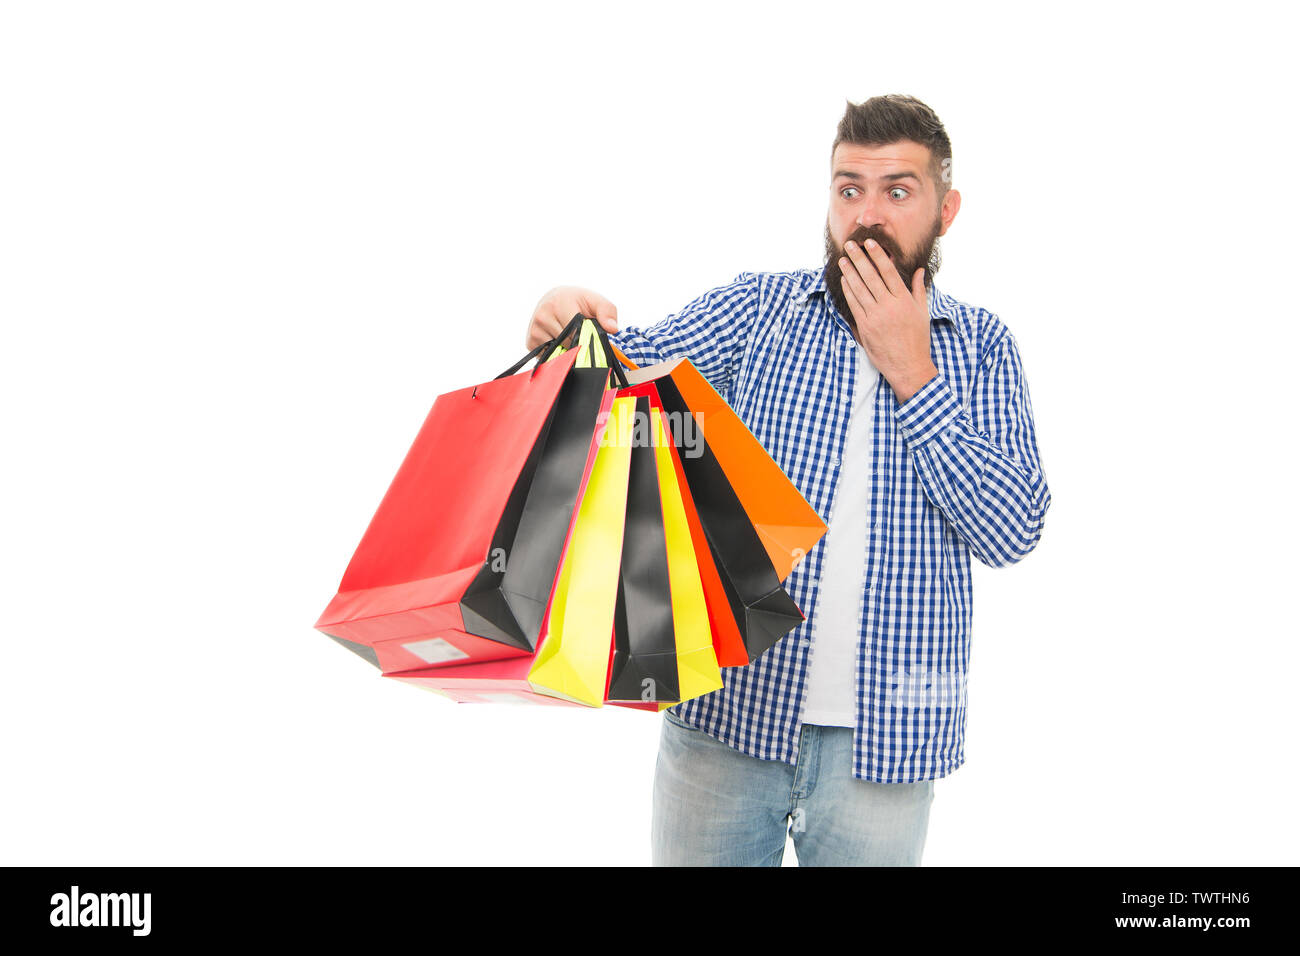 I survived Black Friday. Surprised hipster holding shopping bags after Black Friday isolated on white. Bearded man opening his shopping season on Black Friday. Offering deep discounts on Black Friday. Stock Photo